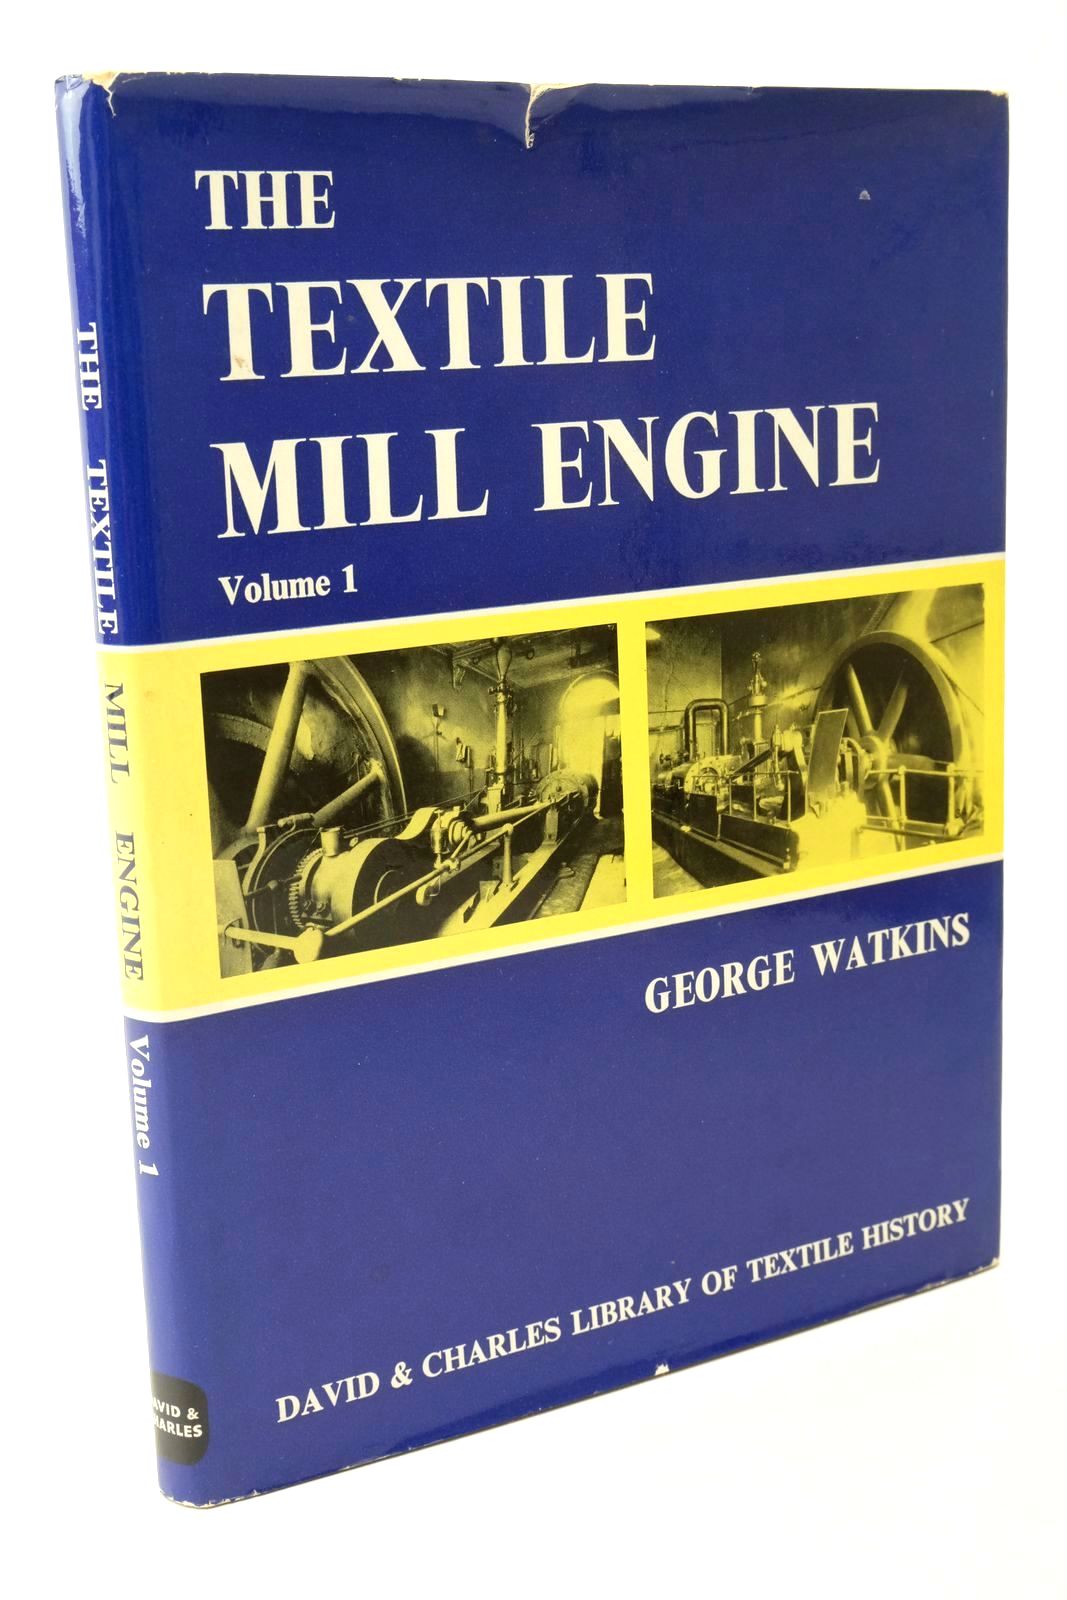 Photo of THE TEXTILE MILL ENGINE VOLUME 1 written by Watkins, George published by David & Charles (STOCK CODE: 1322492)  for sale by Stella & Rose's Books